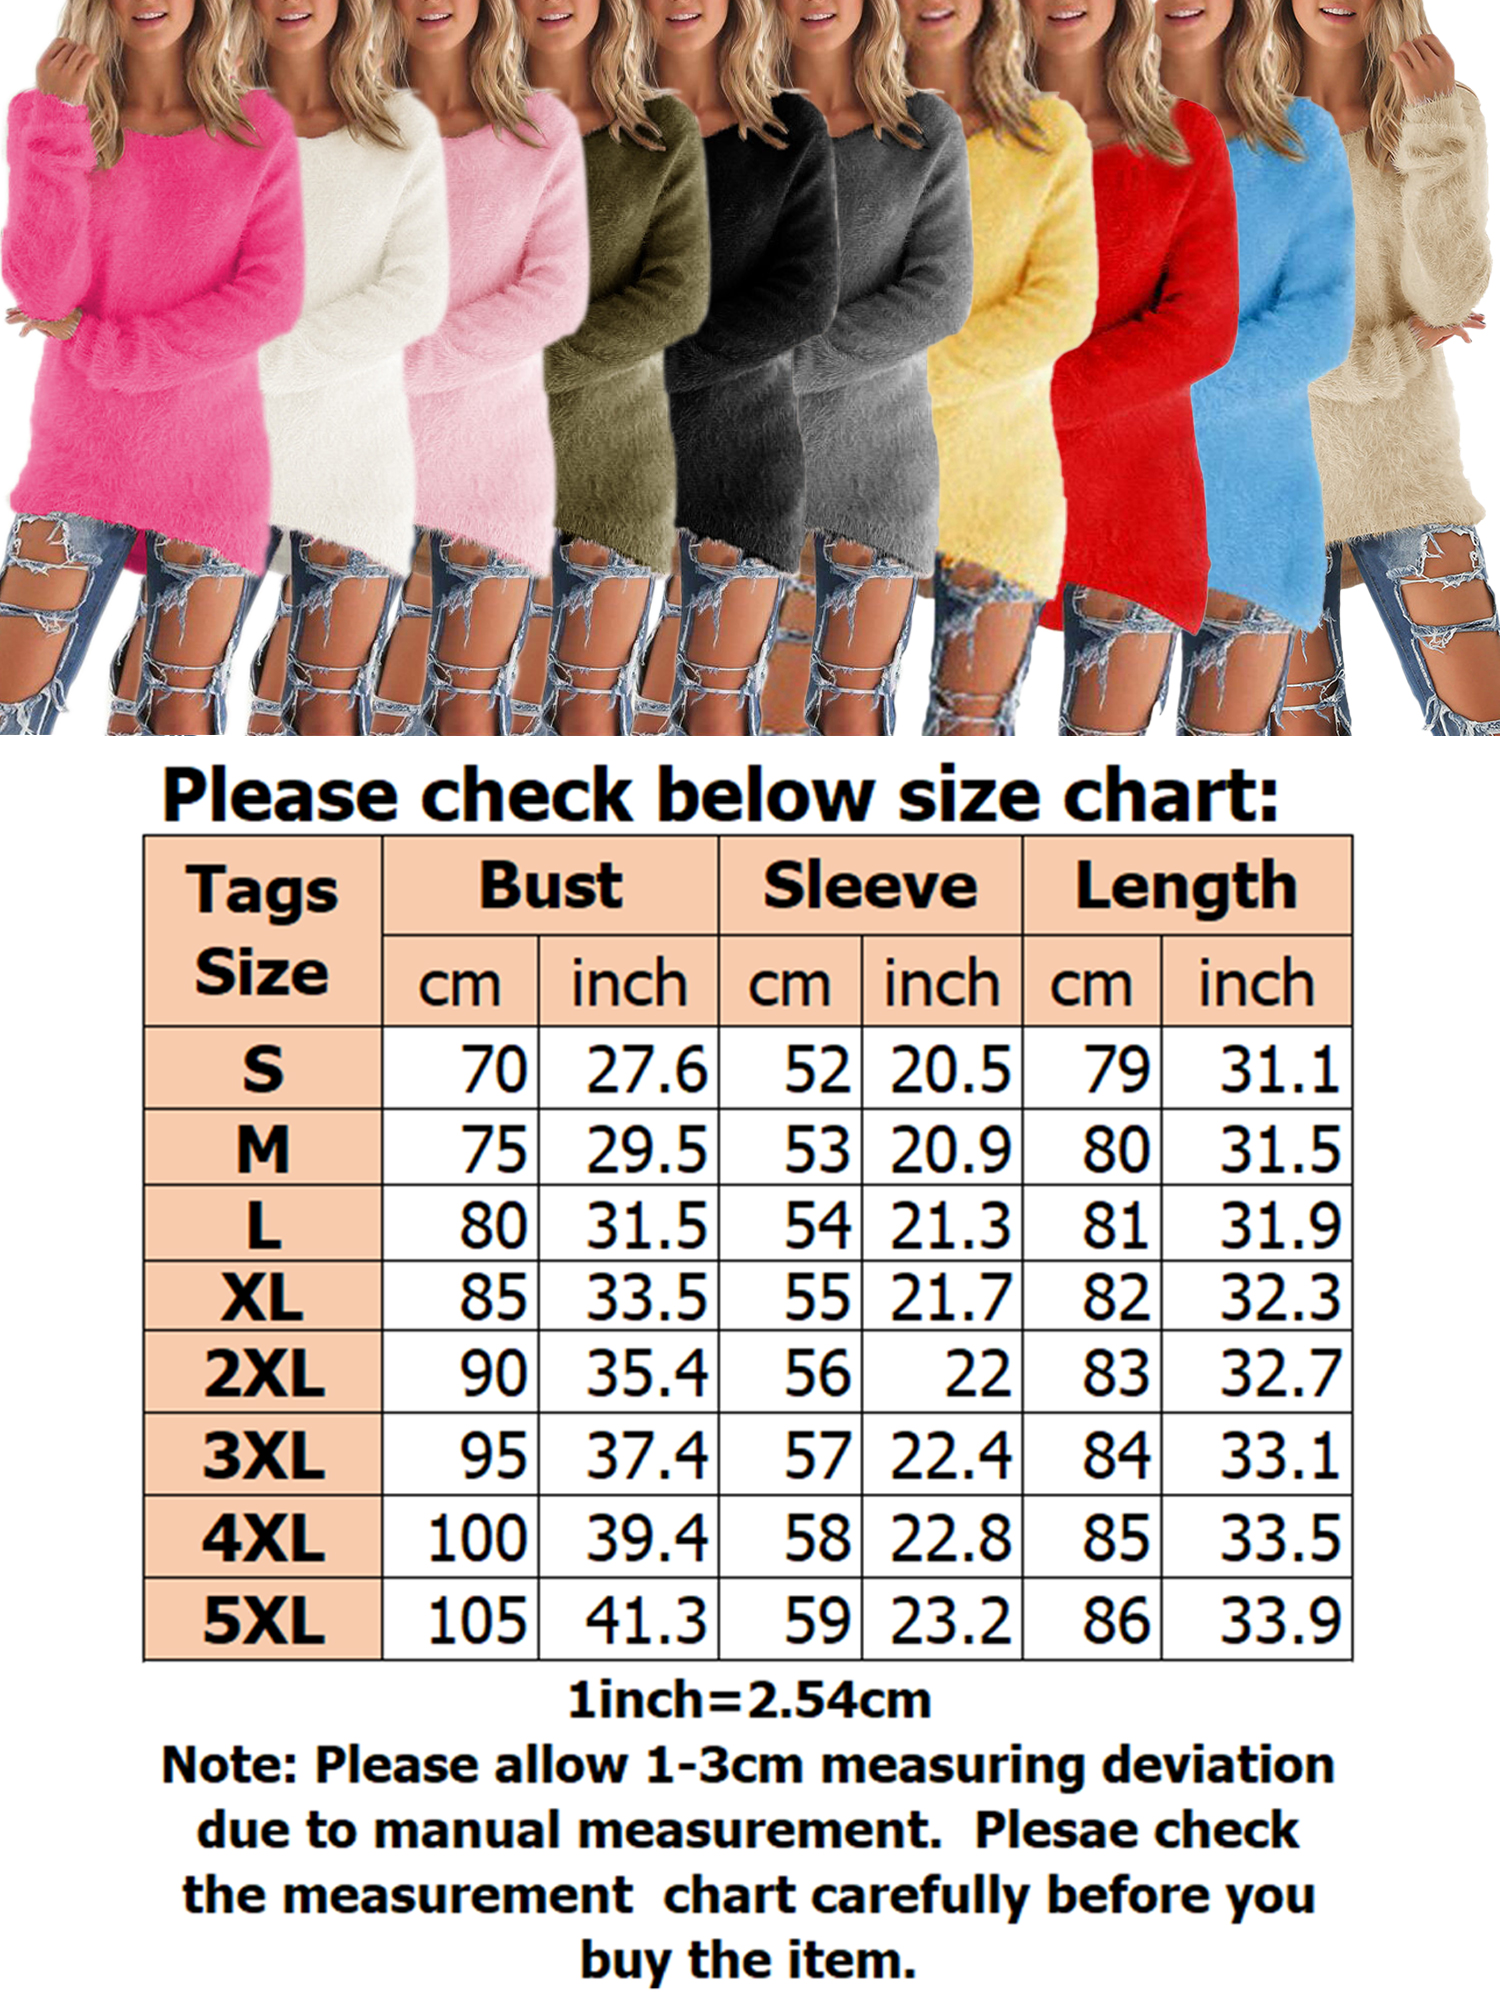 Plus Size Women Mid-Length Loose Solid Color Pullover Sweaters High Low Fluffy Tunics Crew Neck Womens Knit Tops for Junior Ladies Women - image 2 of 6